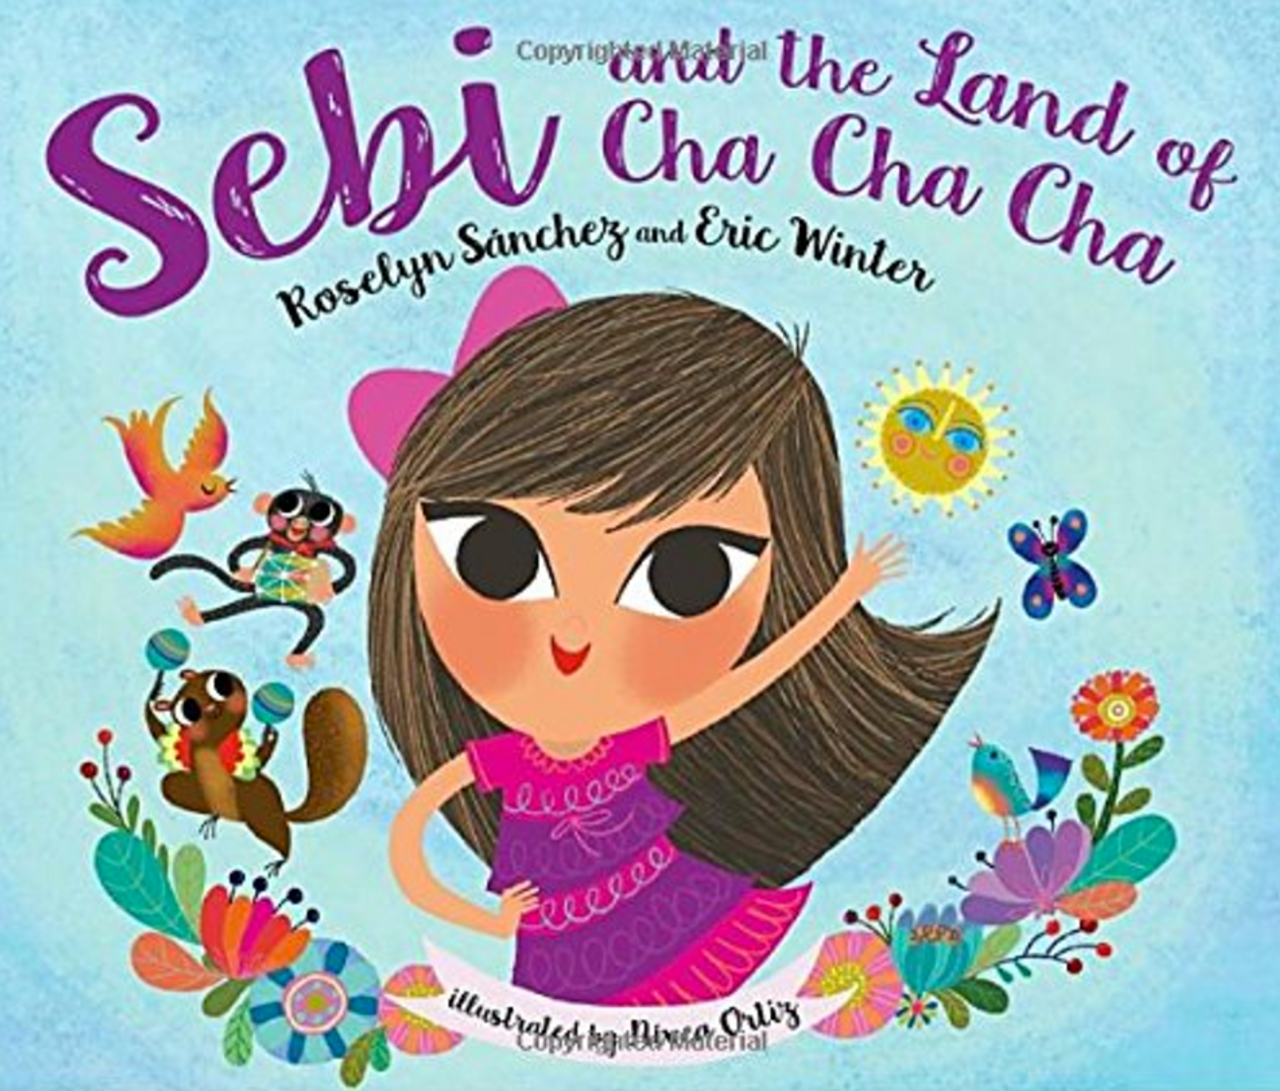 Collection 91+ Images sebi and the land of cha cha cha Updated